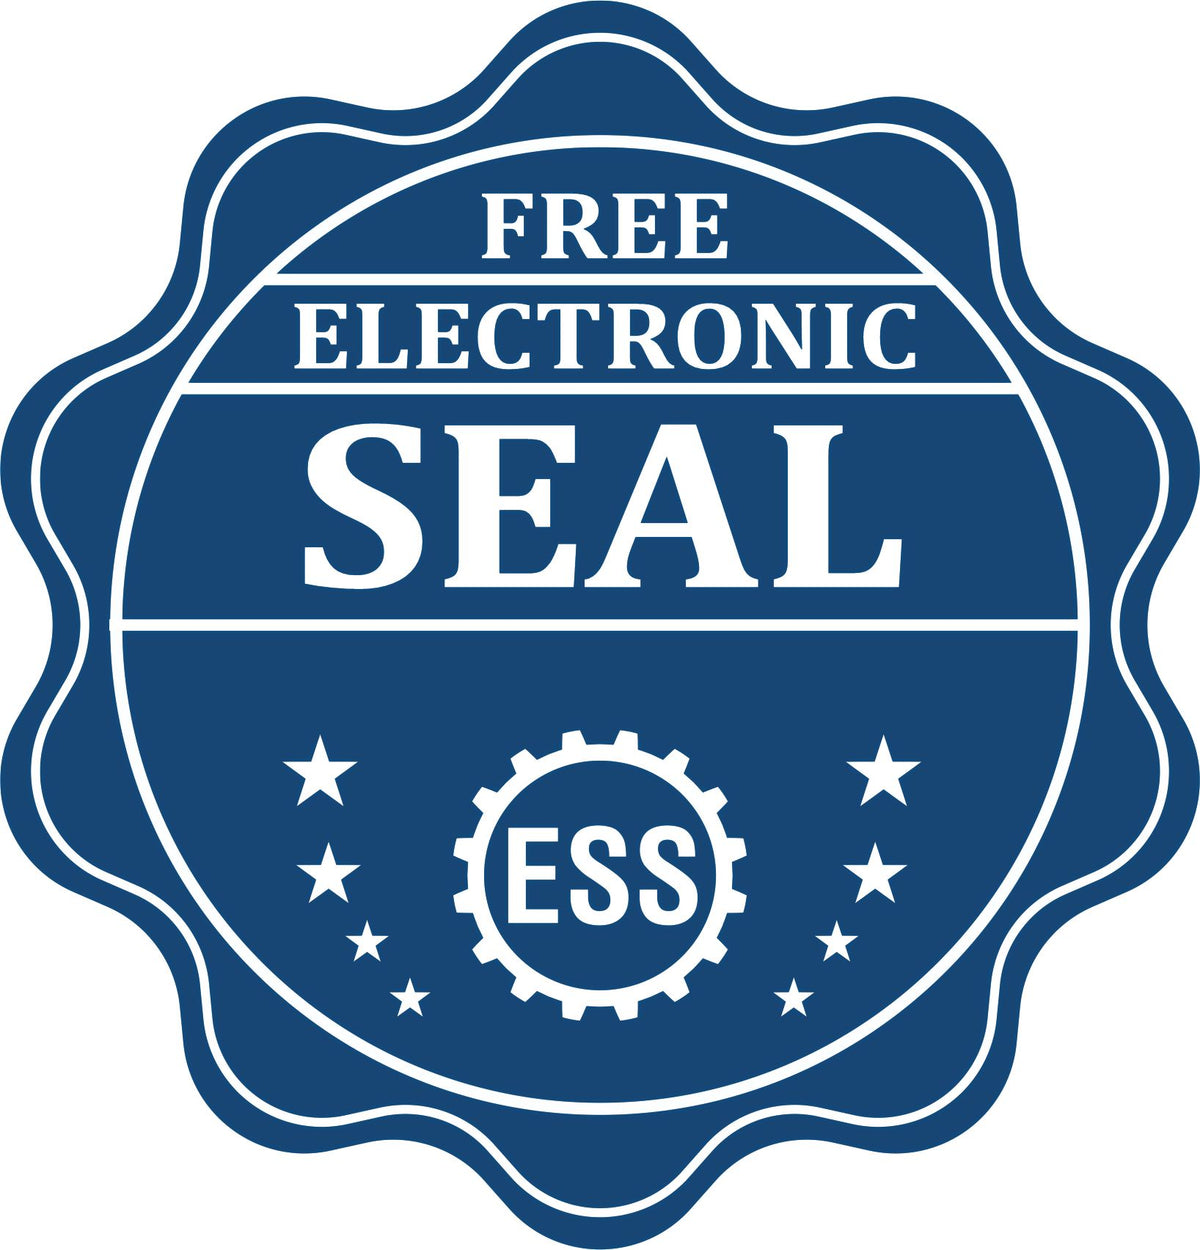 A badge showing a free electronic seal for the Soft Pocket Arkansas Landscape Architect Embosser with stars and the ESS gear on the emblem.